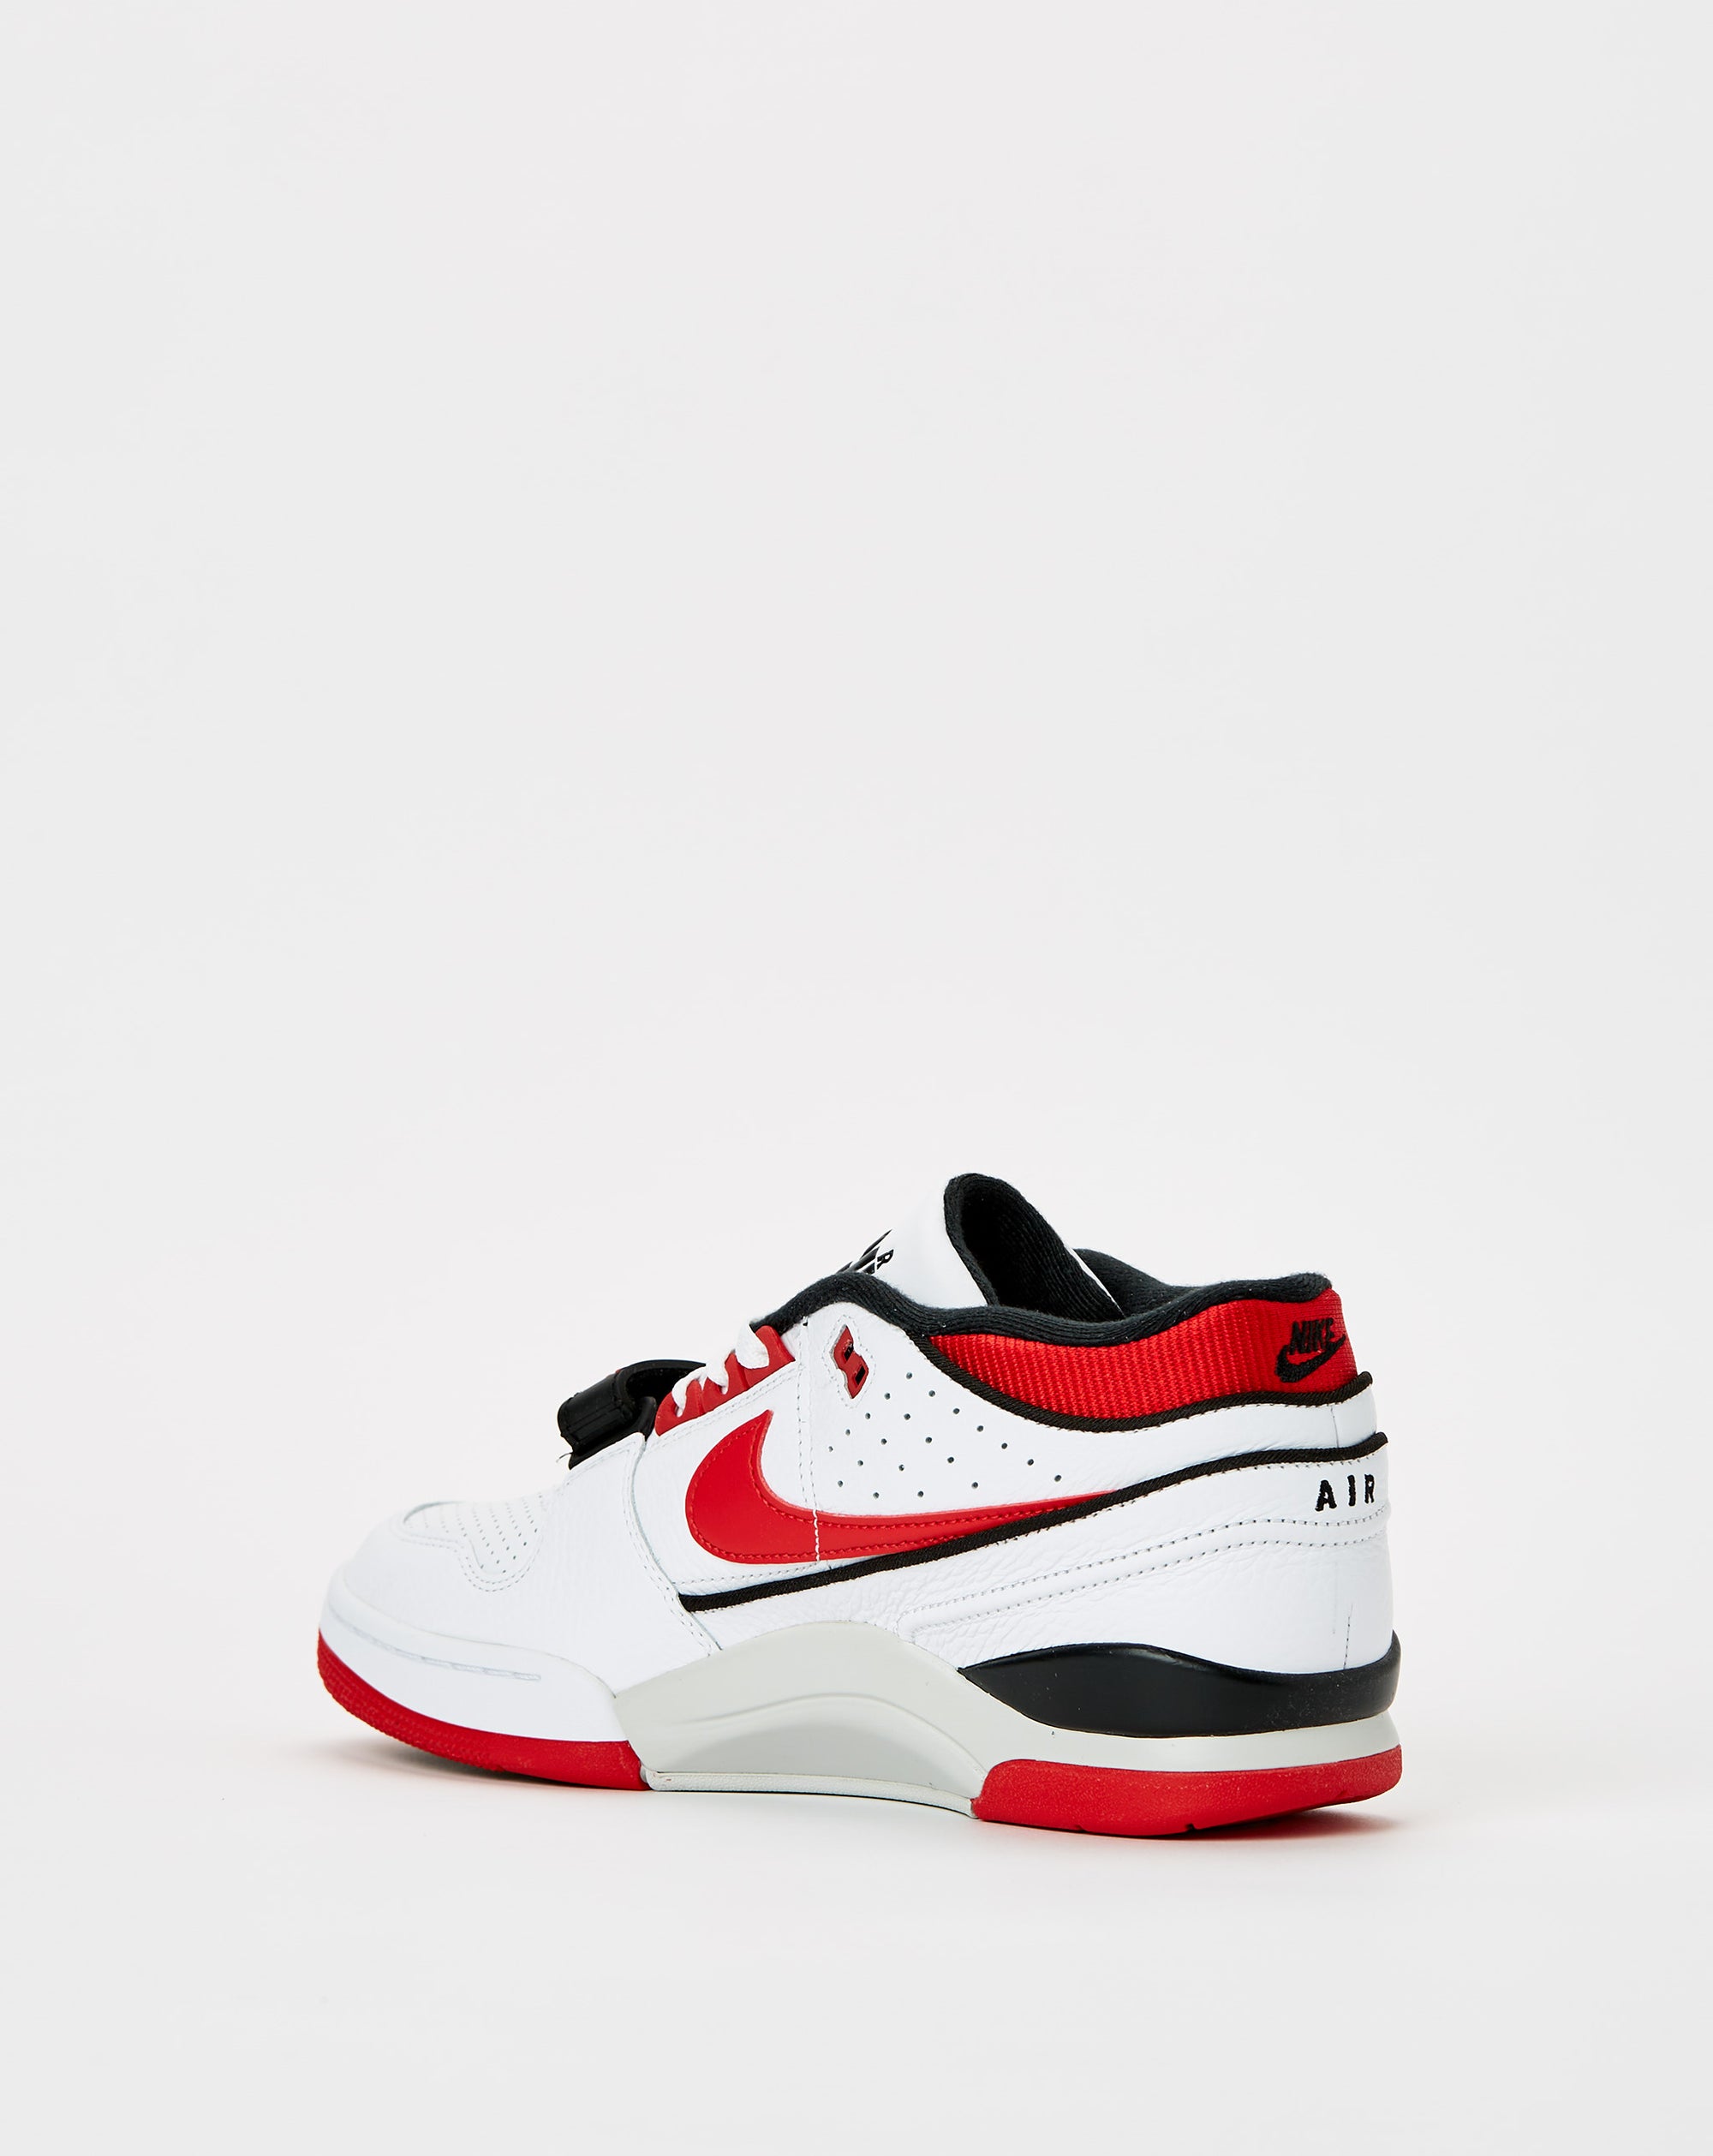 Nike Air Alpha Force Low 'University Red' DZ4627-100 Release Date